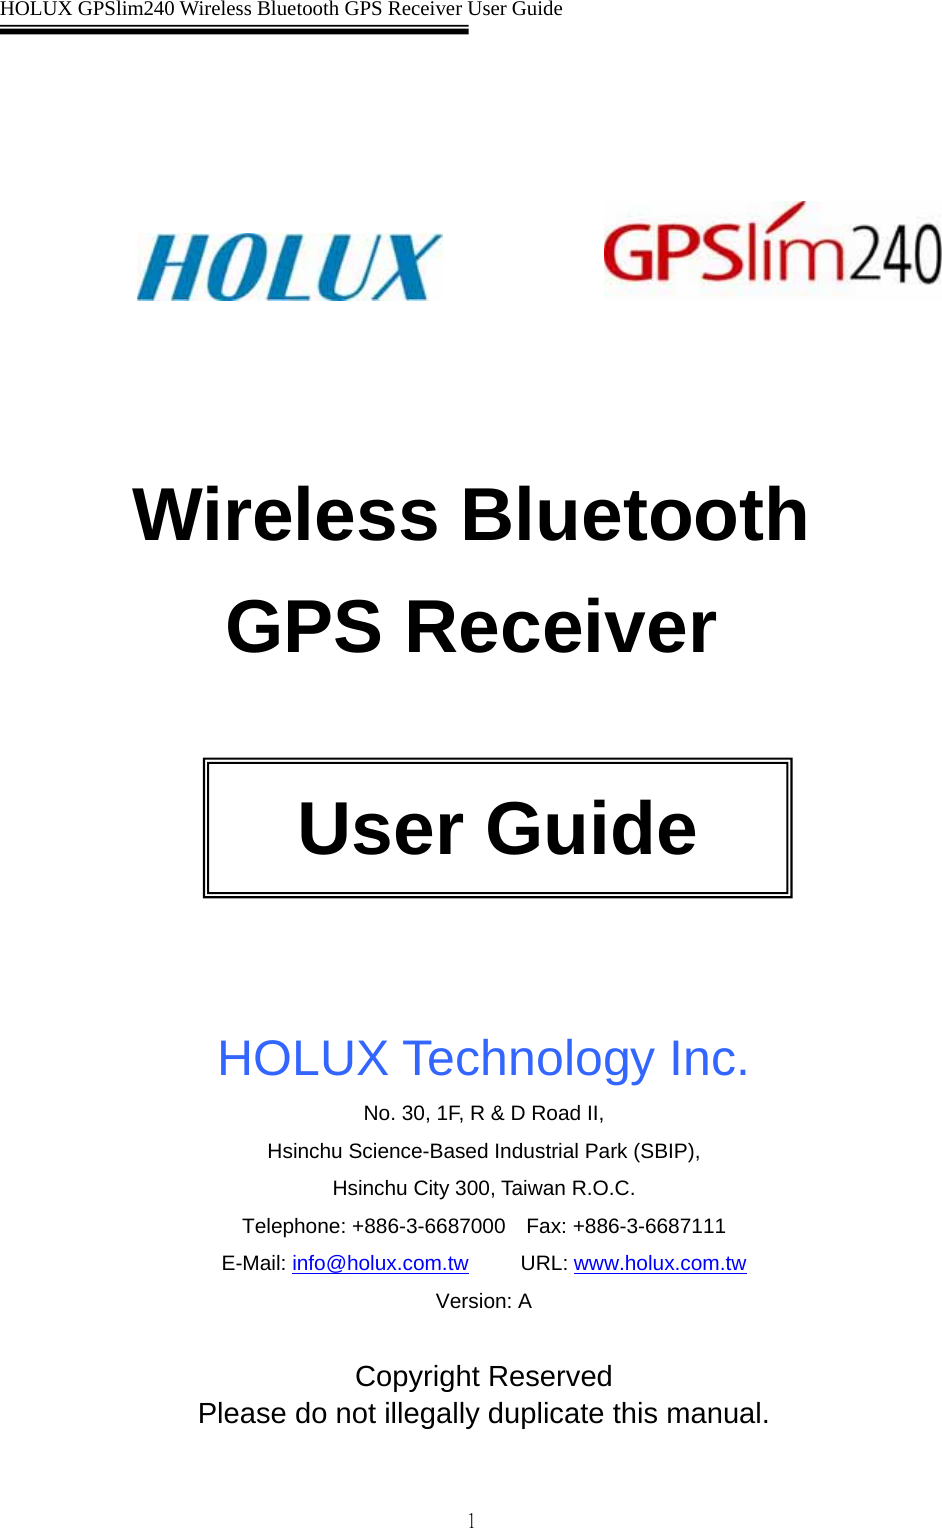  HOLUX GPSlim240 Wireless Bluetooth GPS Receiver User Guide   1                        Wireless Bluetooth   GPS Receiver        HOLUX Technology Inc. No. 30, 1F, R &amp; D Road II,   Hsinchu Science-Based Industrial Park (SBIP),   Hsinchu City 300, Taiwan R.O.C. Telephone: +886-3-6687000  Fax: +886-3-6687111 E-Mail: info@holux.com.tw     URL: www.holux.com.tw  Version: A  Copyright Reserved Please do not illegally duplicate this manual.                                                                              User Guide 